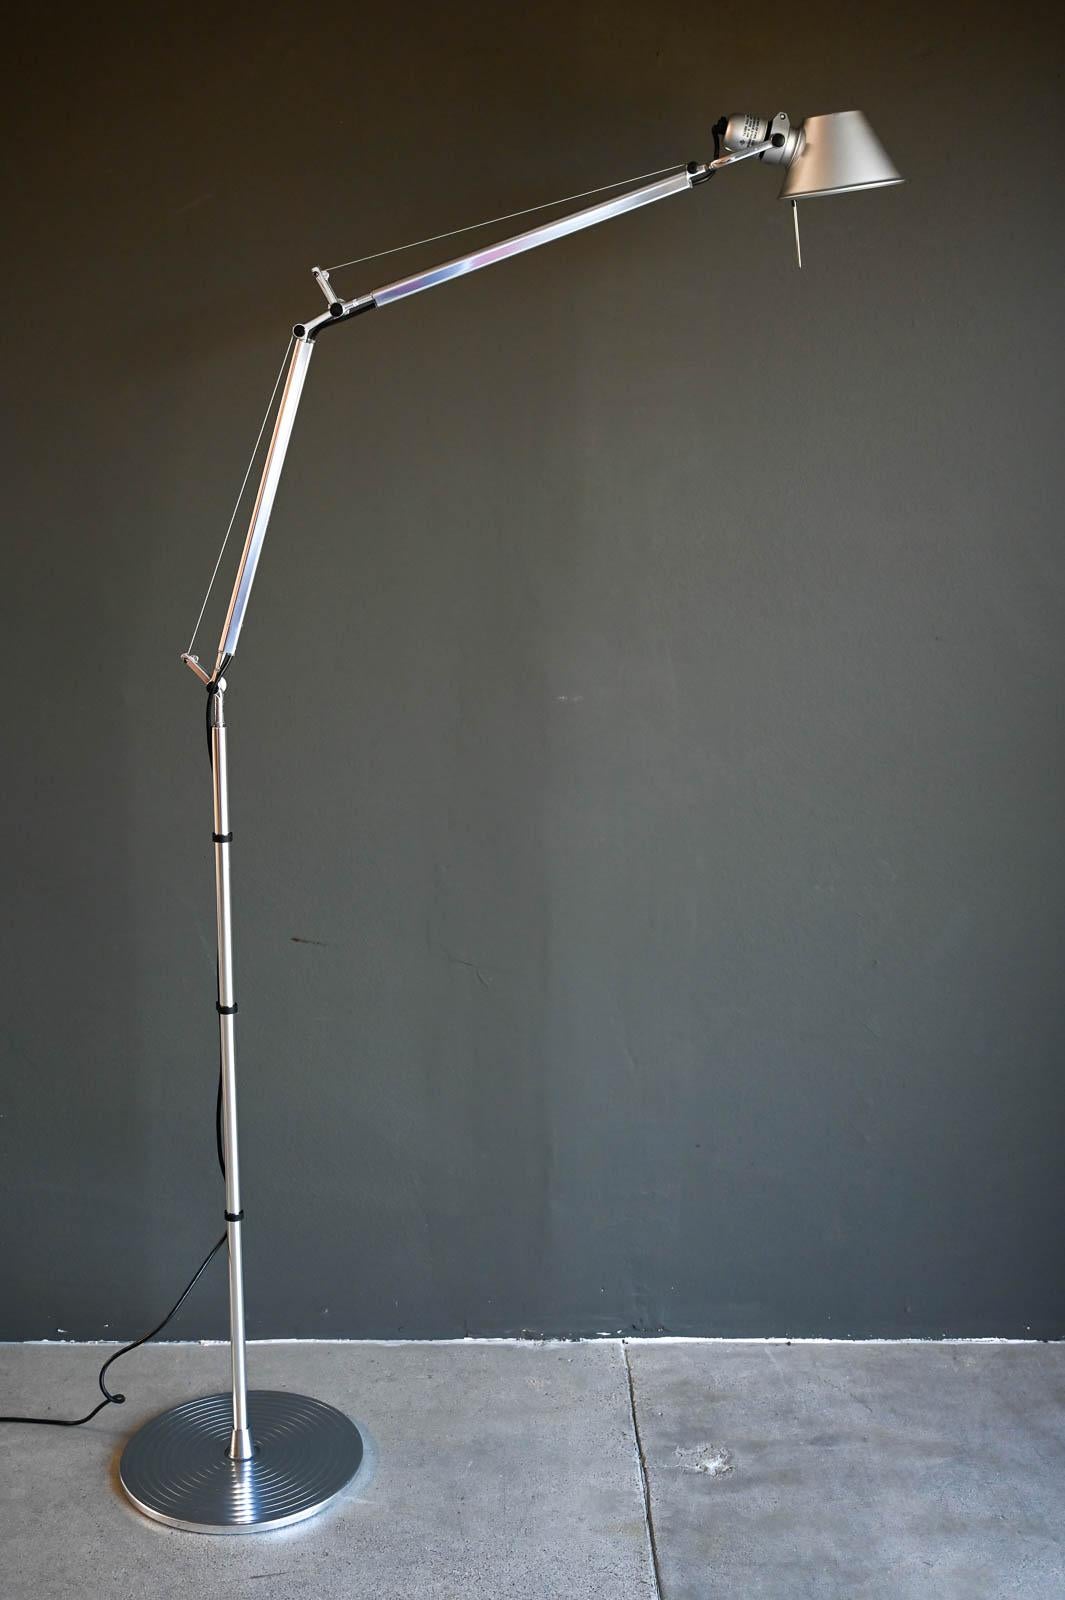 Artemide Tolomeo Floor Lamp by Michele de Lucchi & Giancarlo Fassina.   An extension to the iconic Tolomeo family, Tolomeo floor combines the body of the Tolomeo table lamp with a floor standing support, allowing for a floor lighting solution that